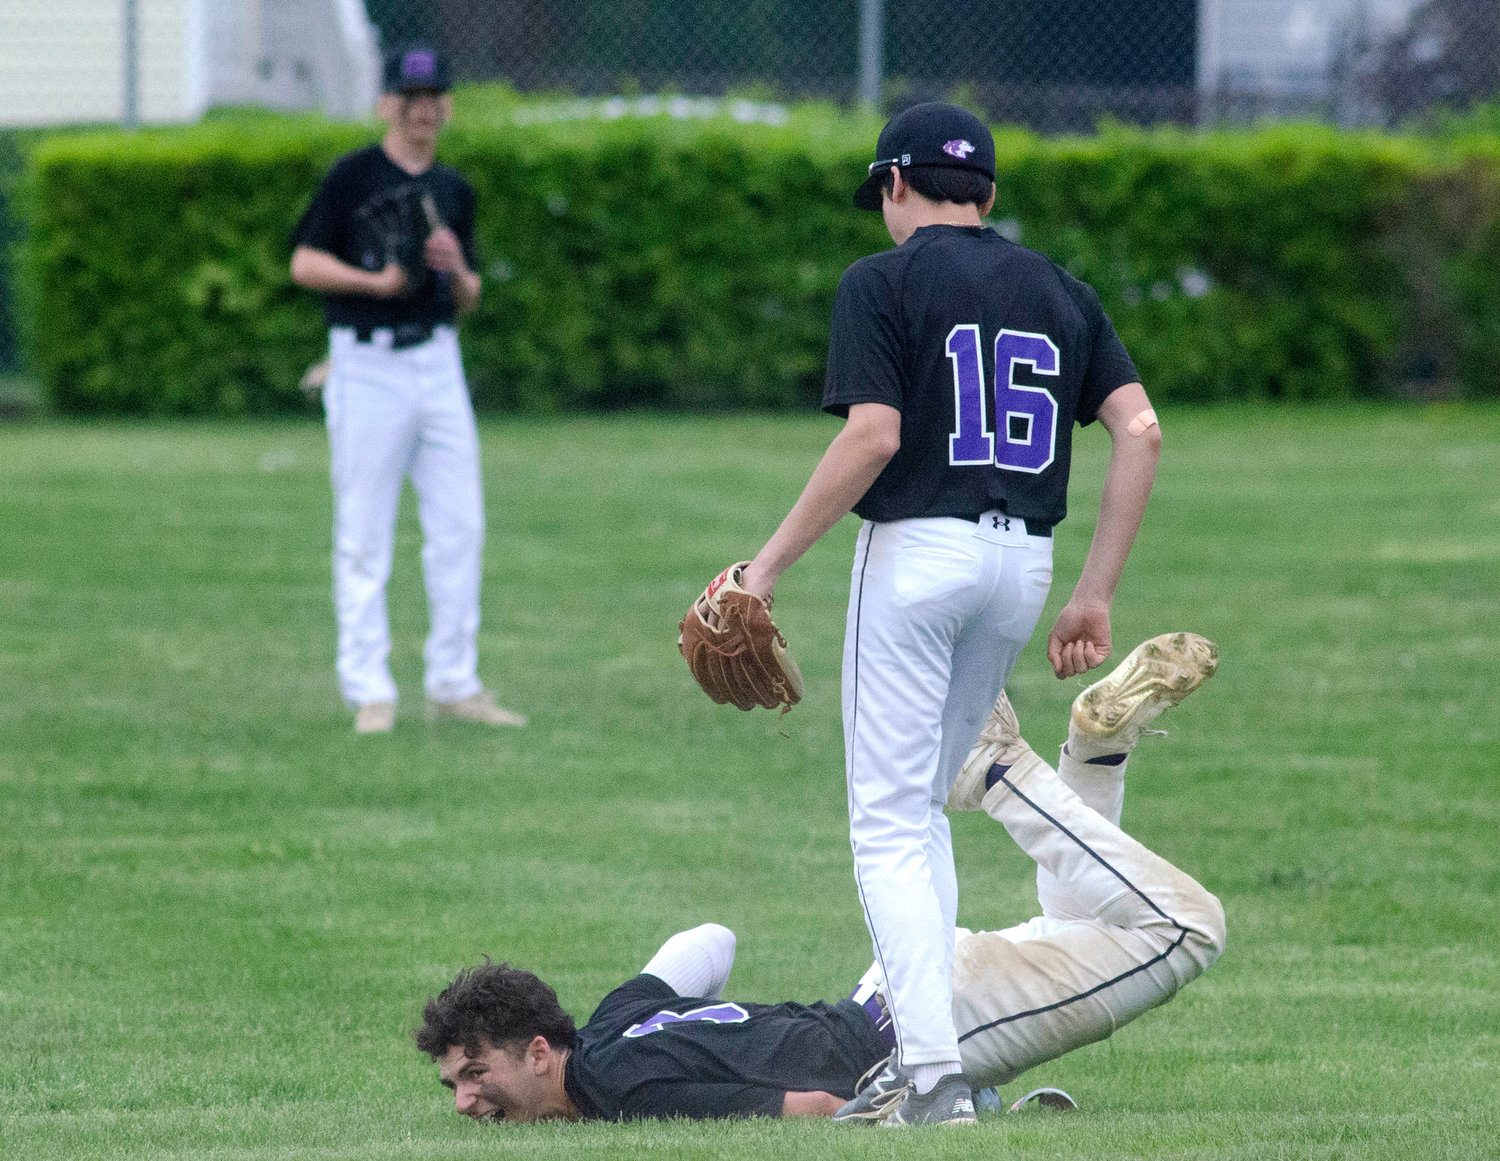 Infielder Dan Desilets looks on as second baseman Parker Camelo hits the ground hard after diving for a short fly ball. Camelo who previously injured his shoulder, rose to his feet and waved to the dug out that he was okay after the play.